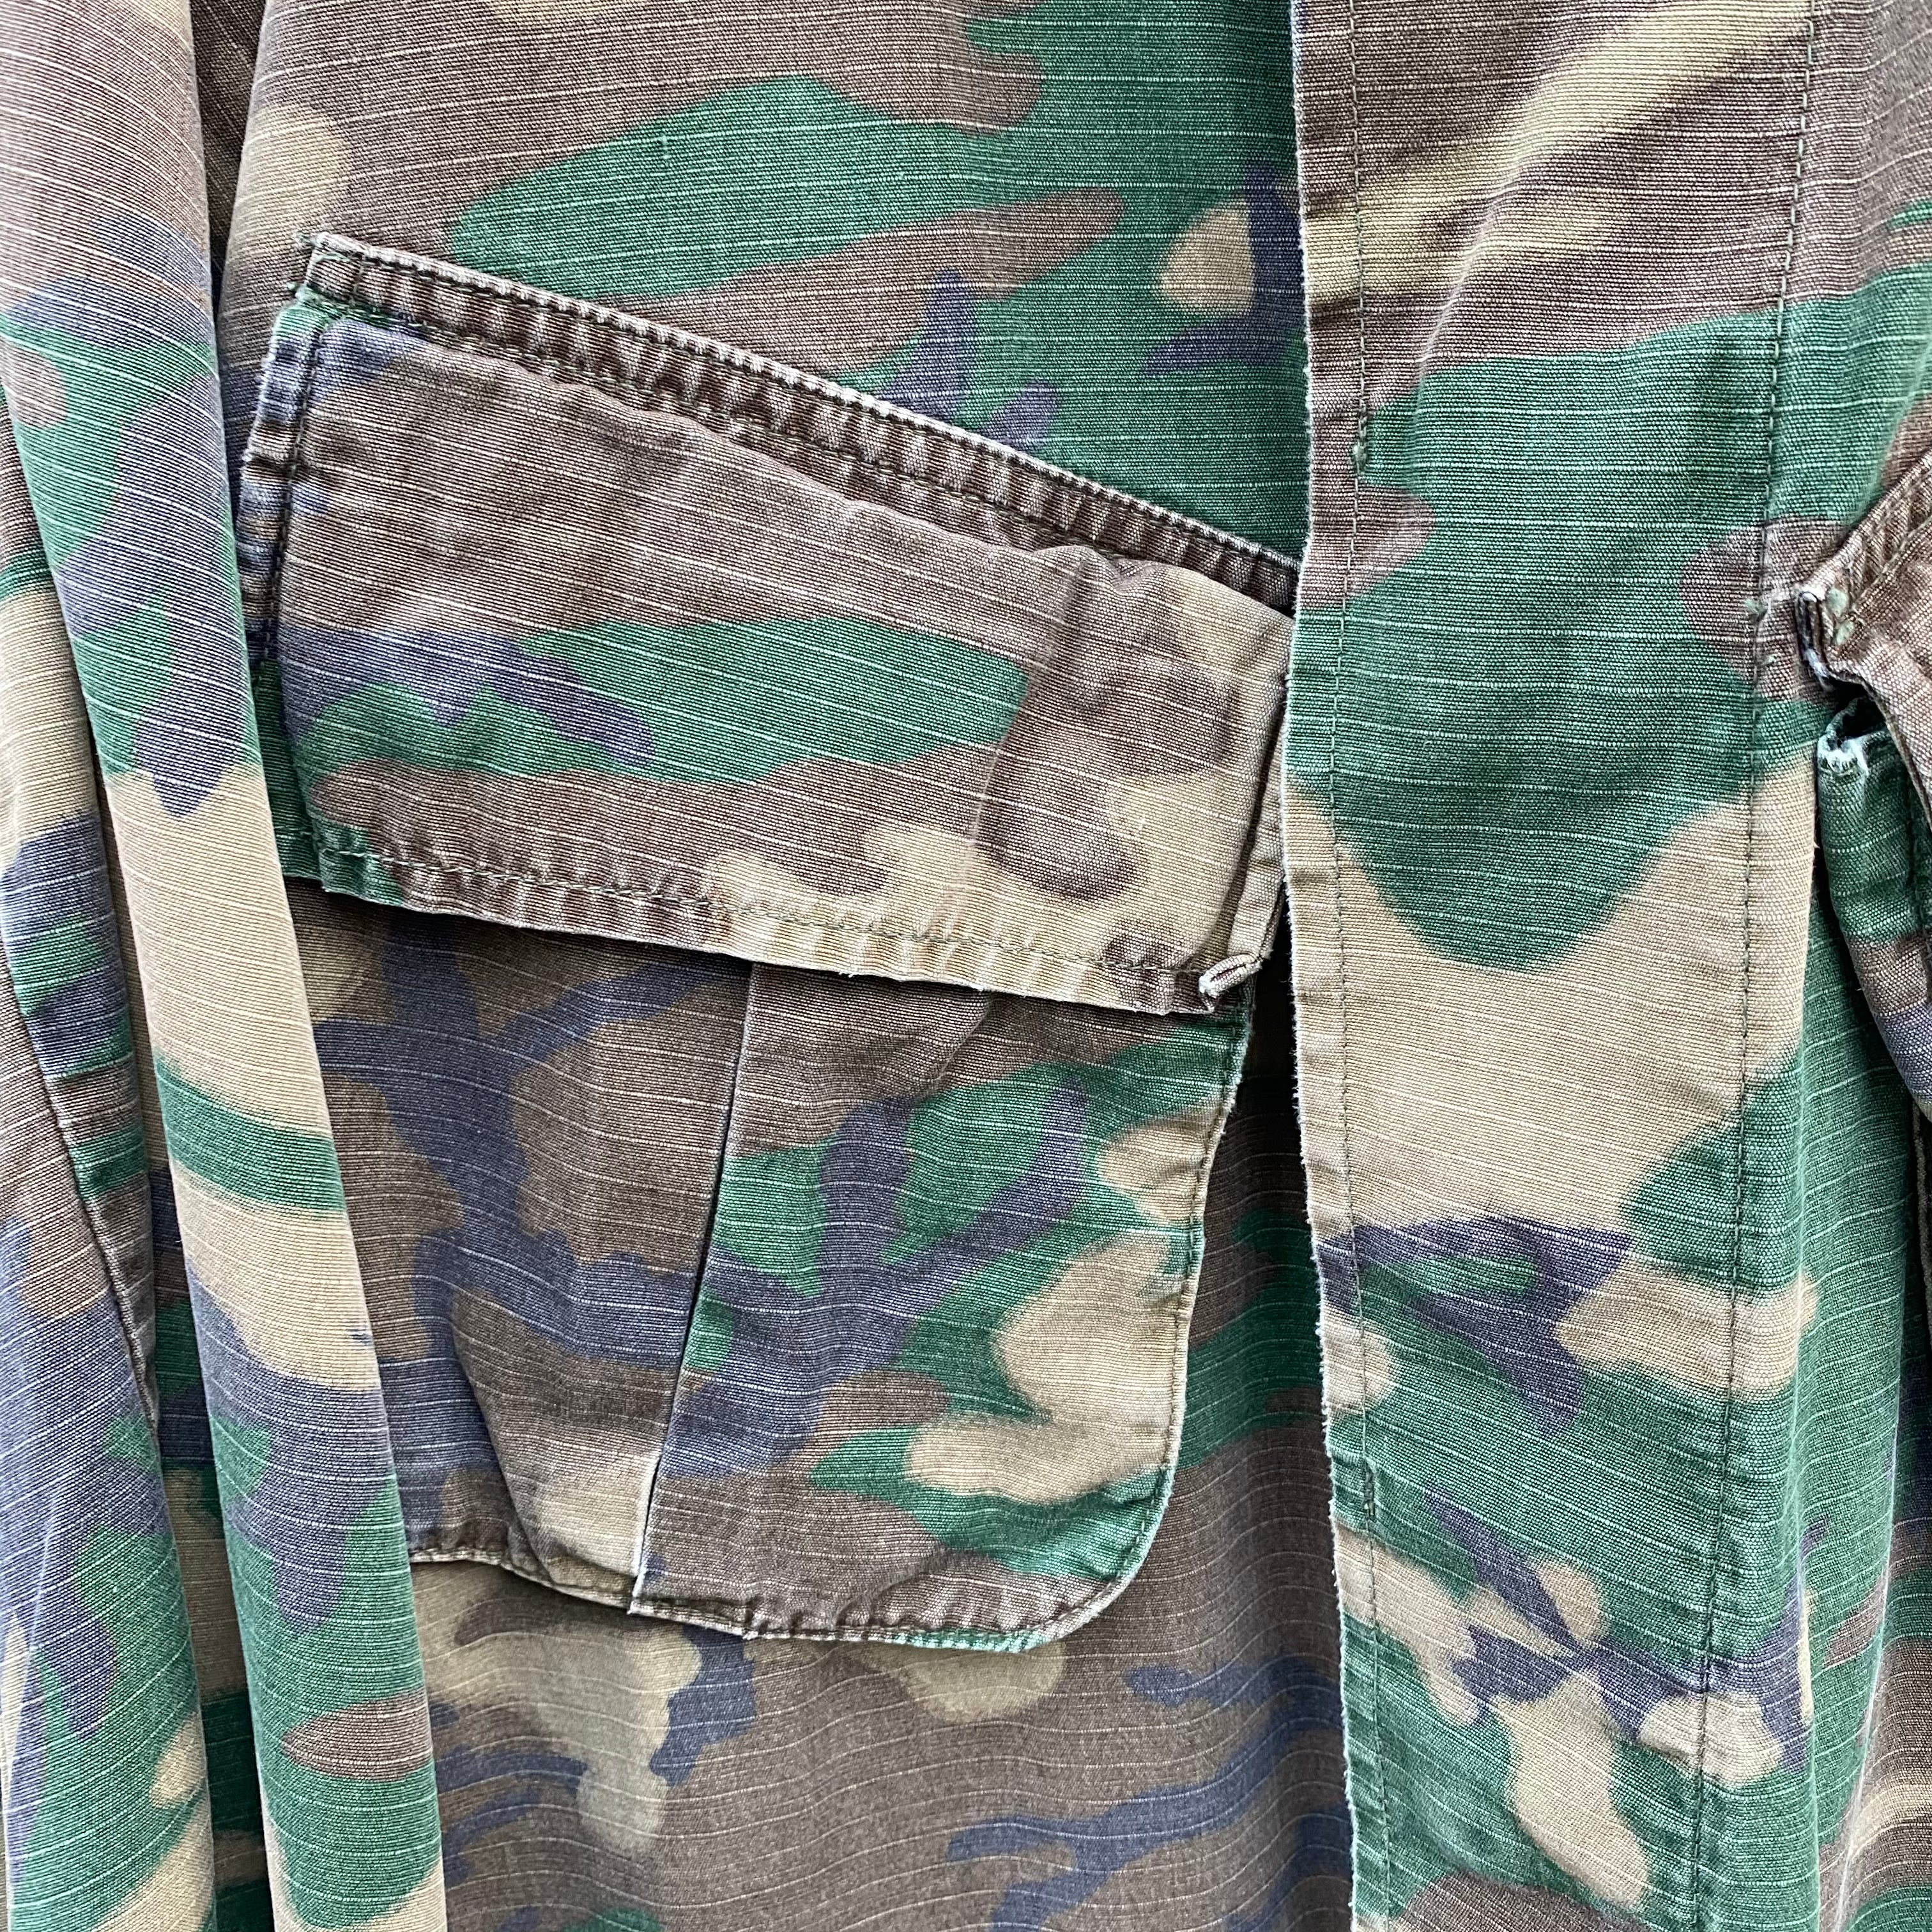 [ ONLY ONE ! ] US ARMED FORCES 60's - 70's JUNGLE FATIGUE SHIRT / Mr.Clean Select